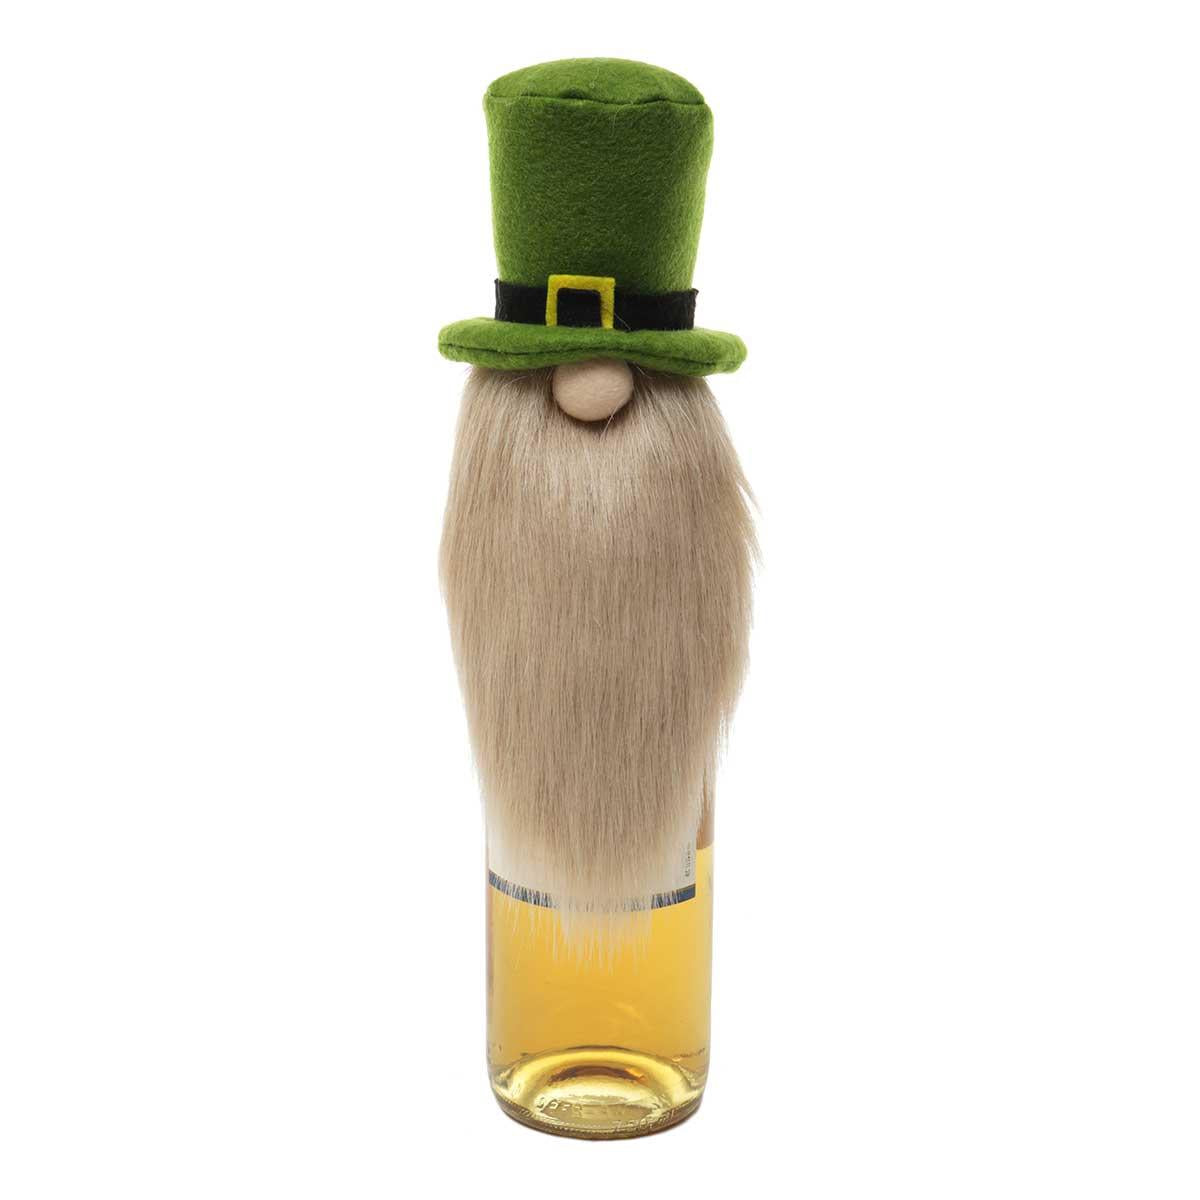 St. Patty's Day Gnome Bottle Topper